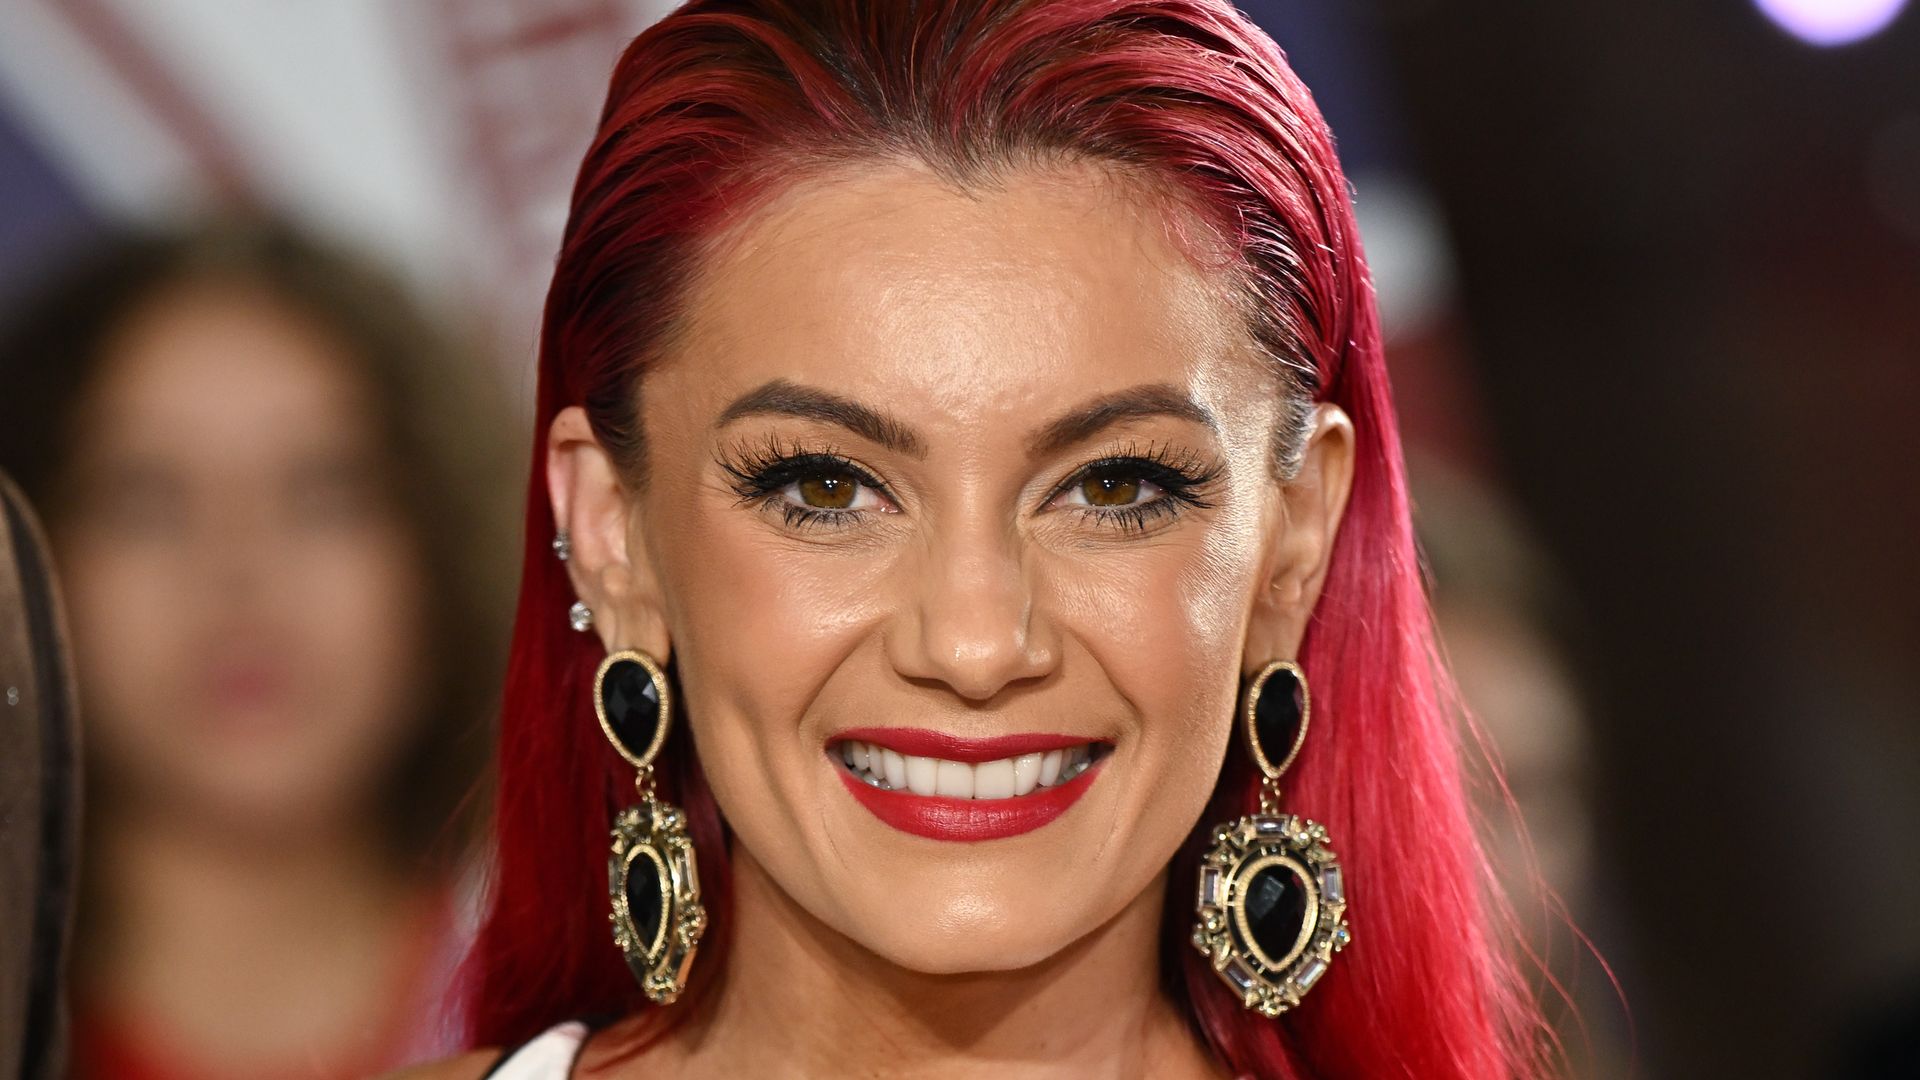 Dianne Buswell flashes toned tummy in ultra-low rise jeans